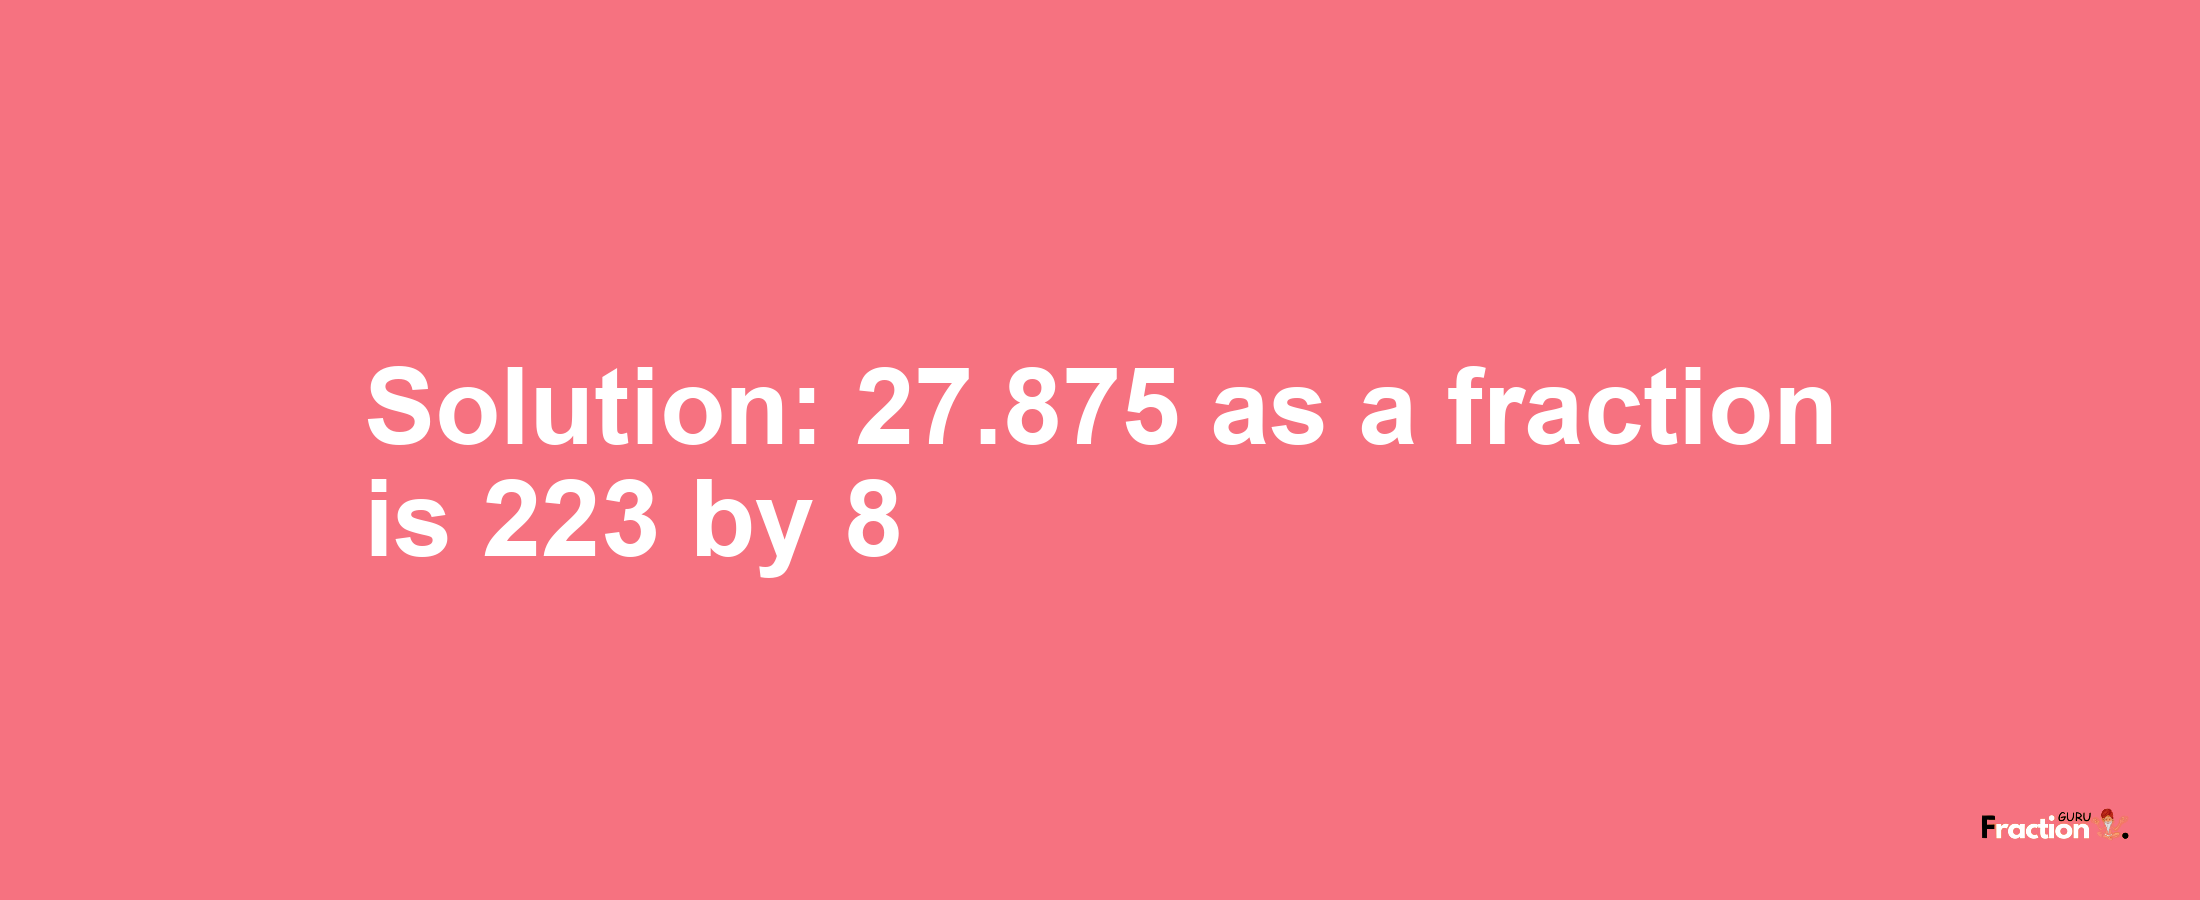 Solution:27.875 as a fraction is 223/8